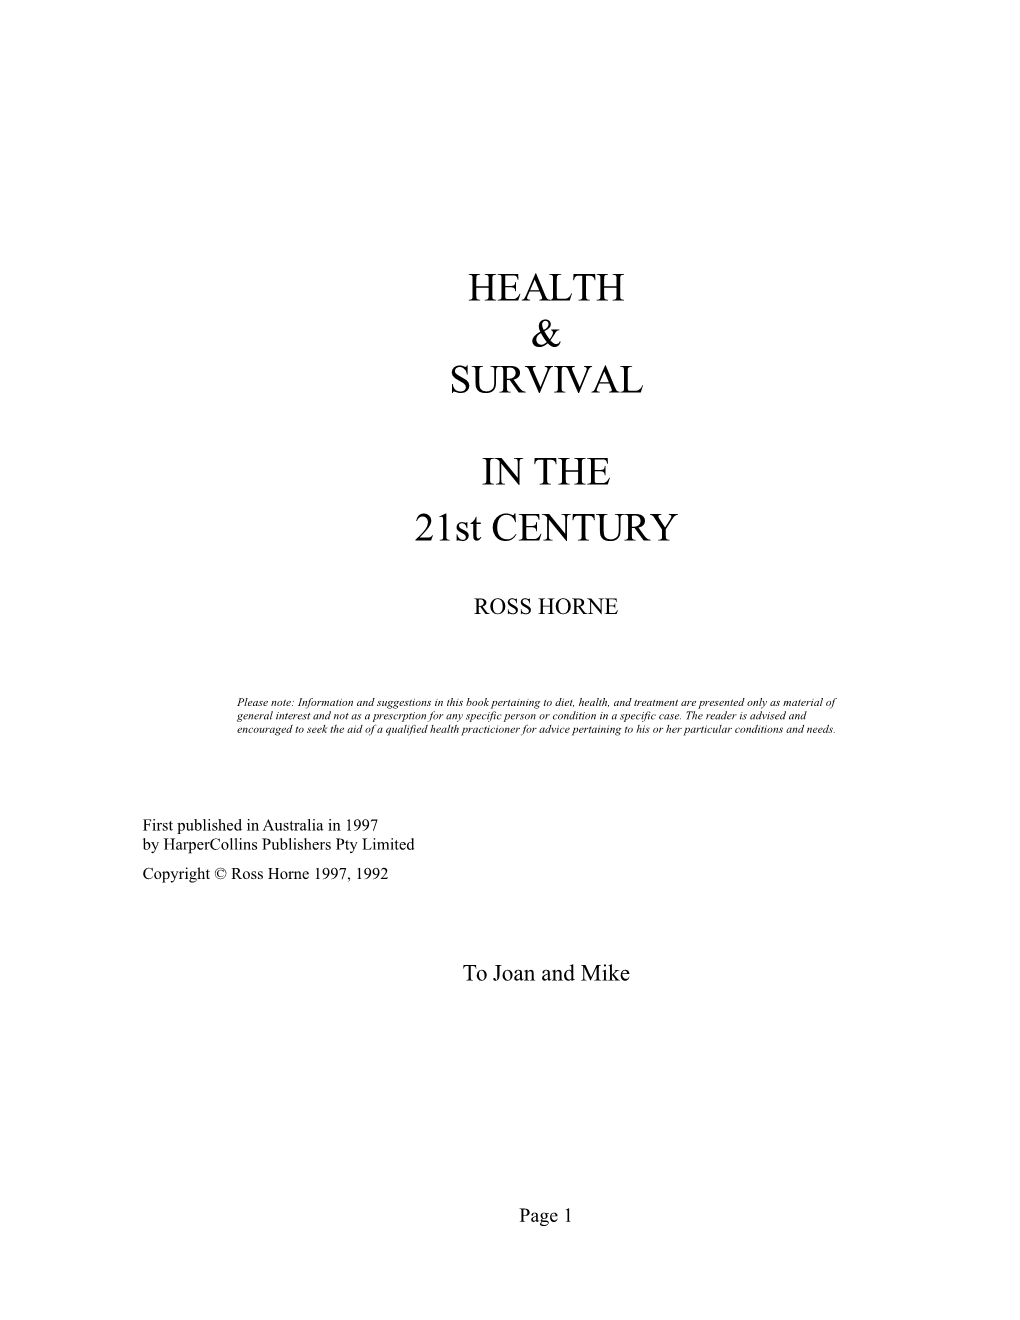 HEALTH & SURVIVAL in the 21St CENTURY